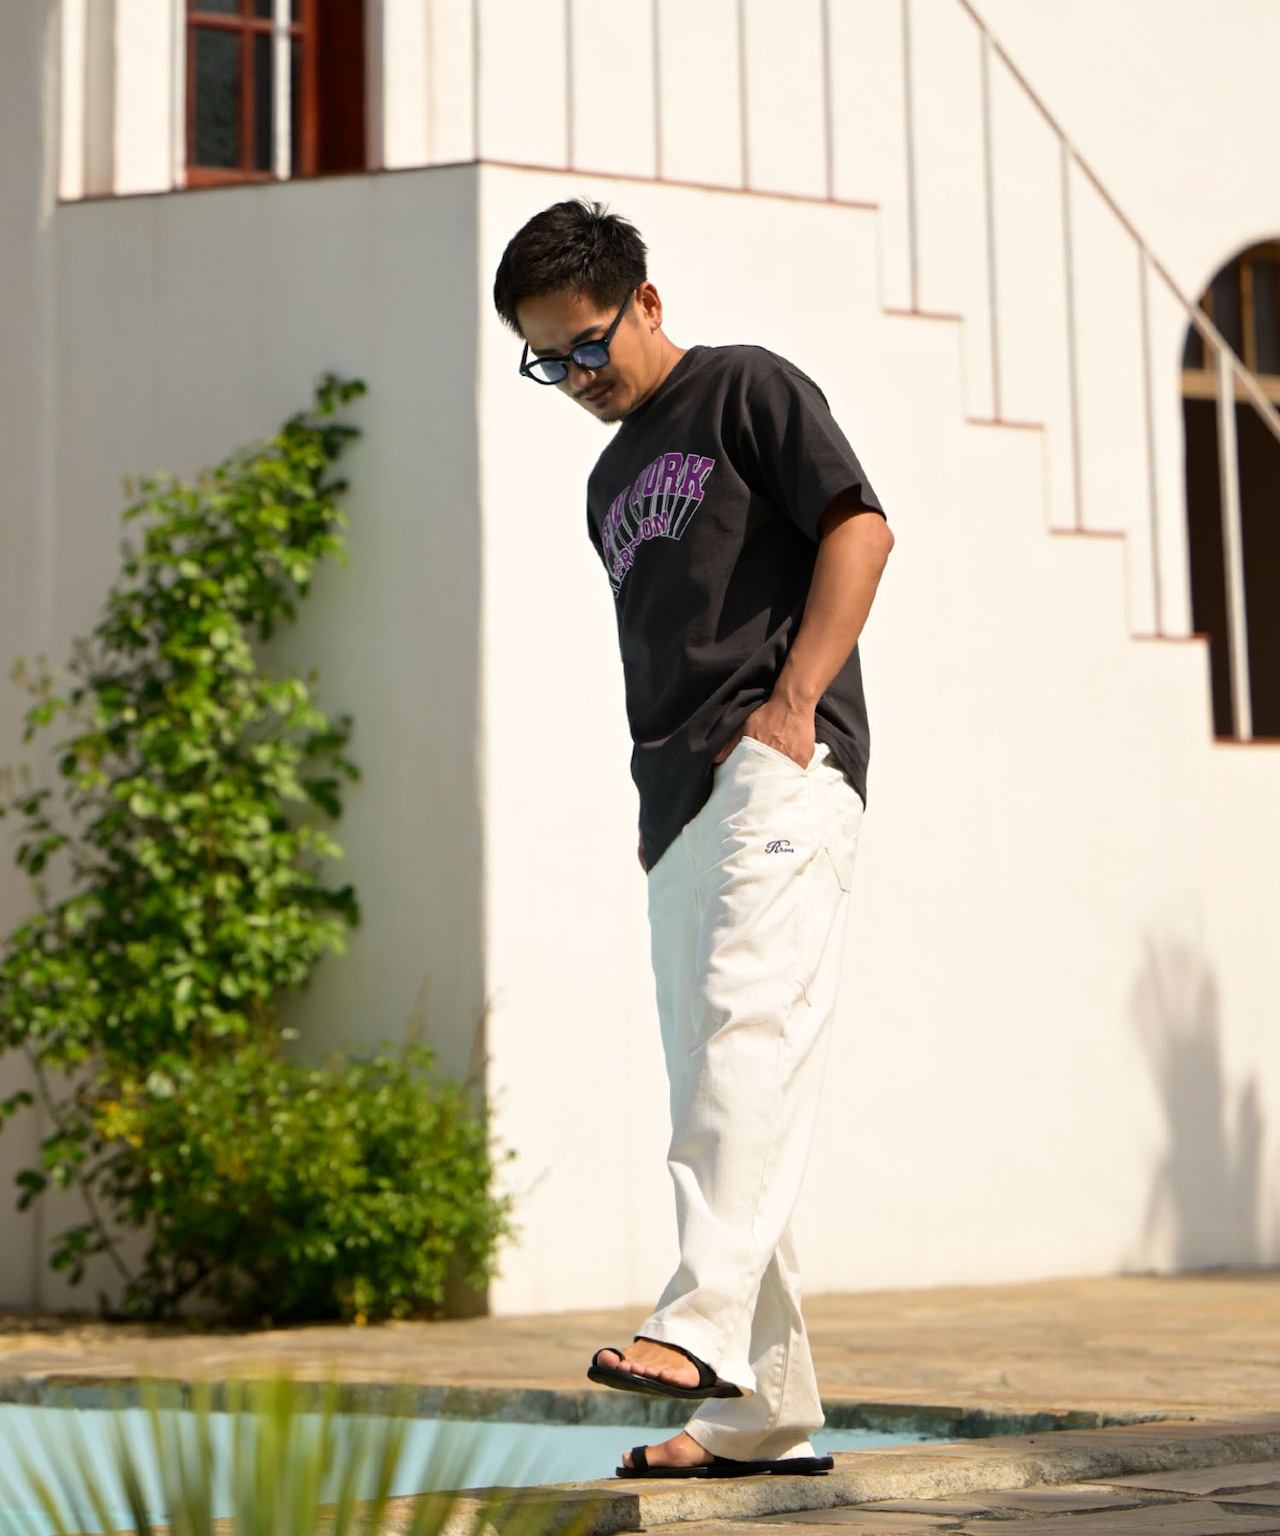 【#Re:room】COLOR CHINO PAINTER WIDE PANTS［REP217］